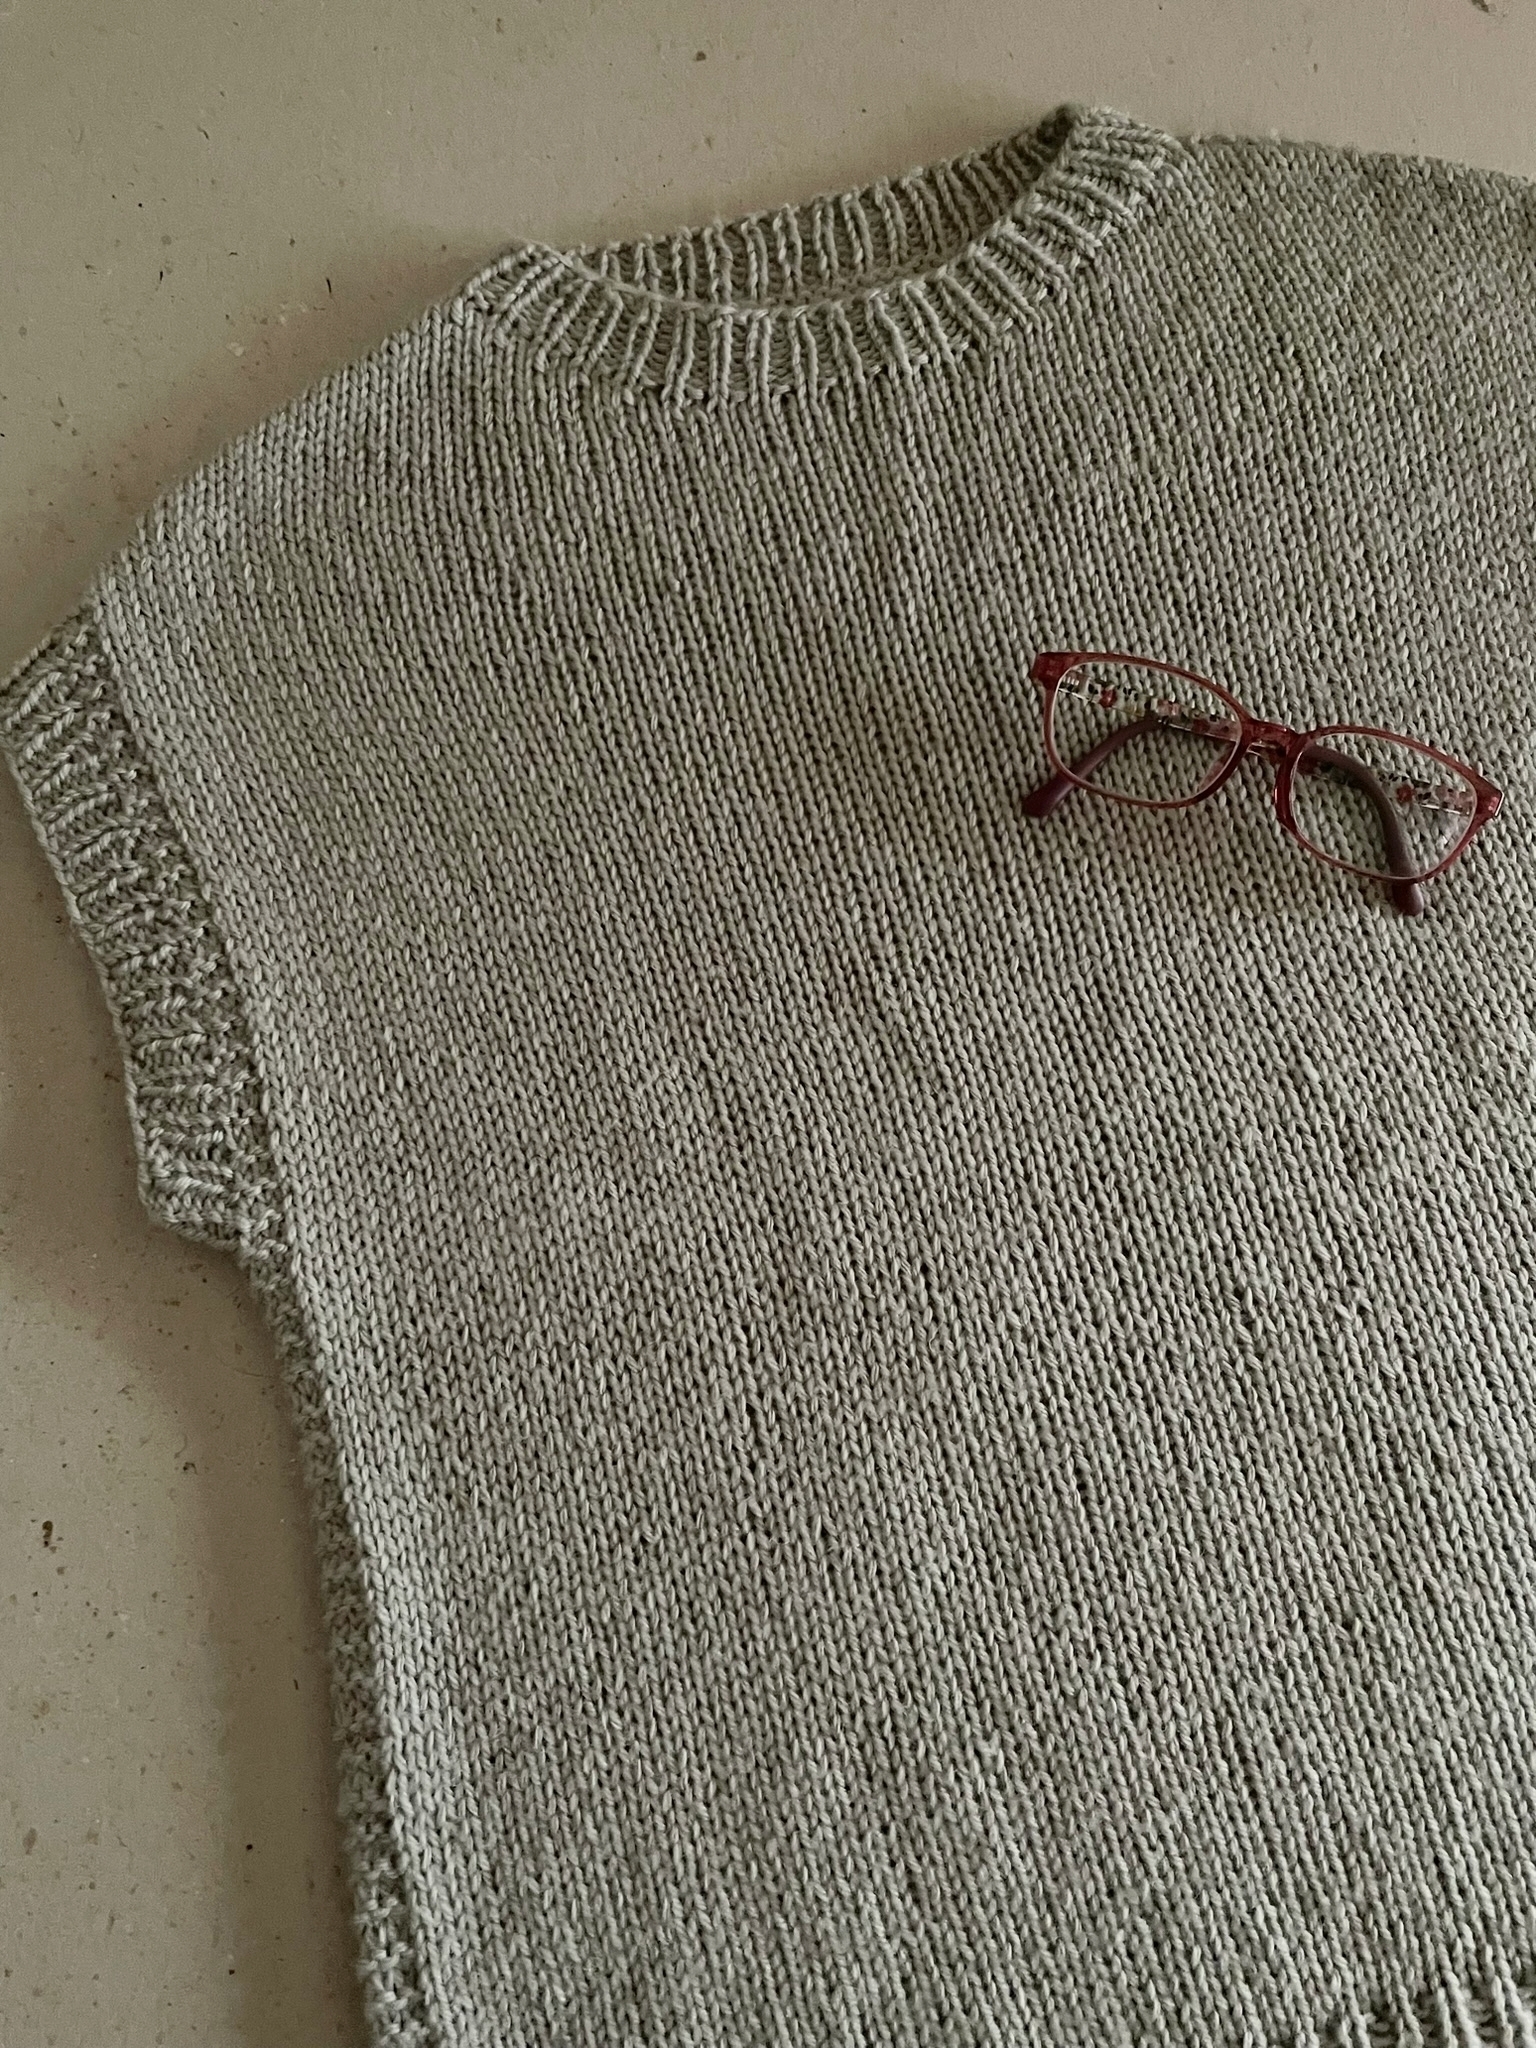 A handknitted gray short-sleeved vest with my eyeglasses on it for visual interest